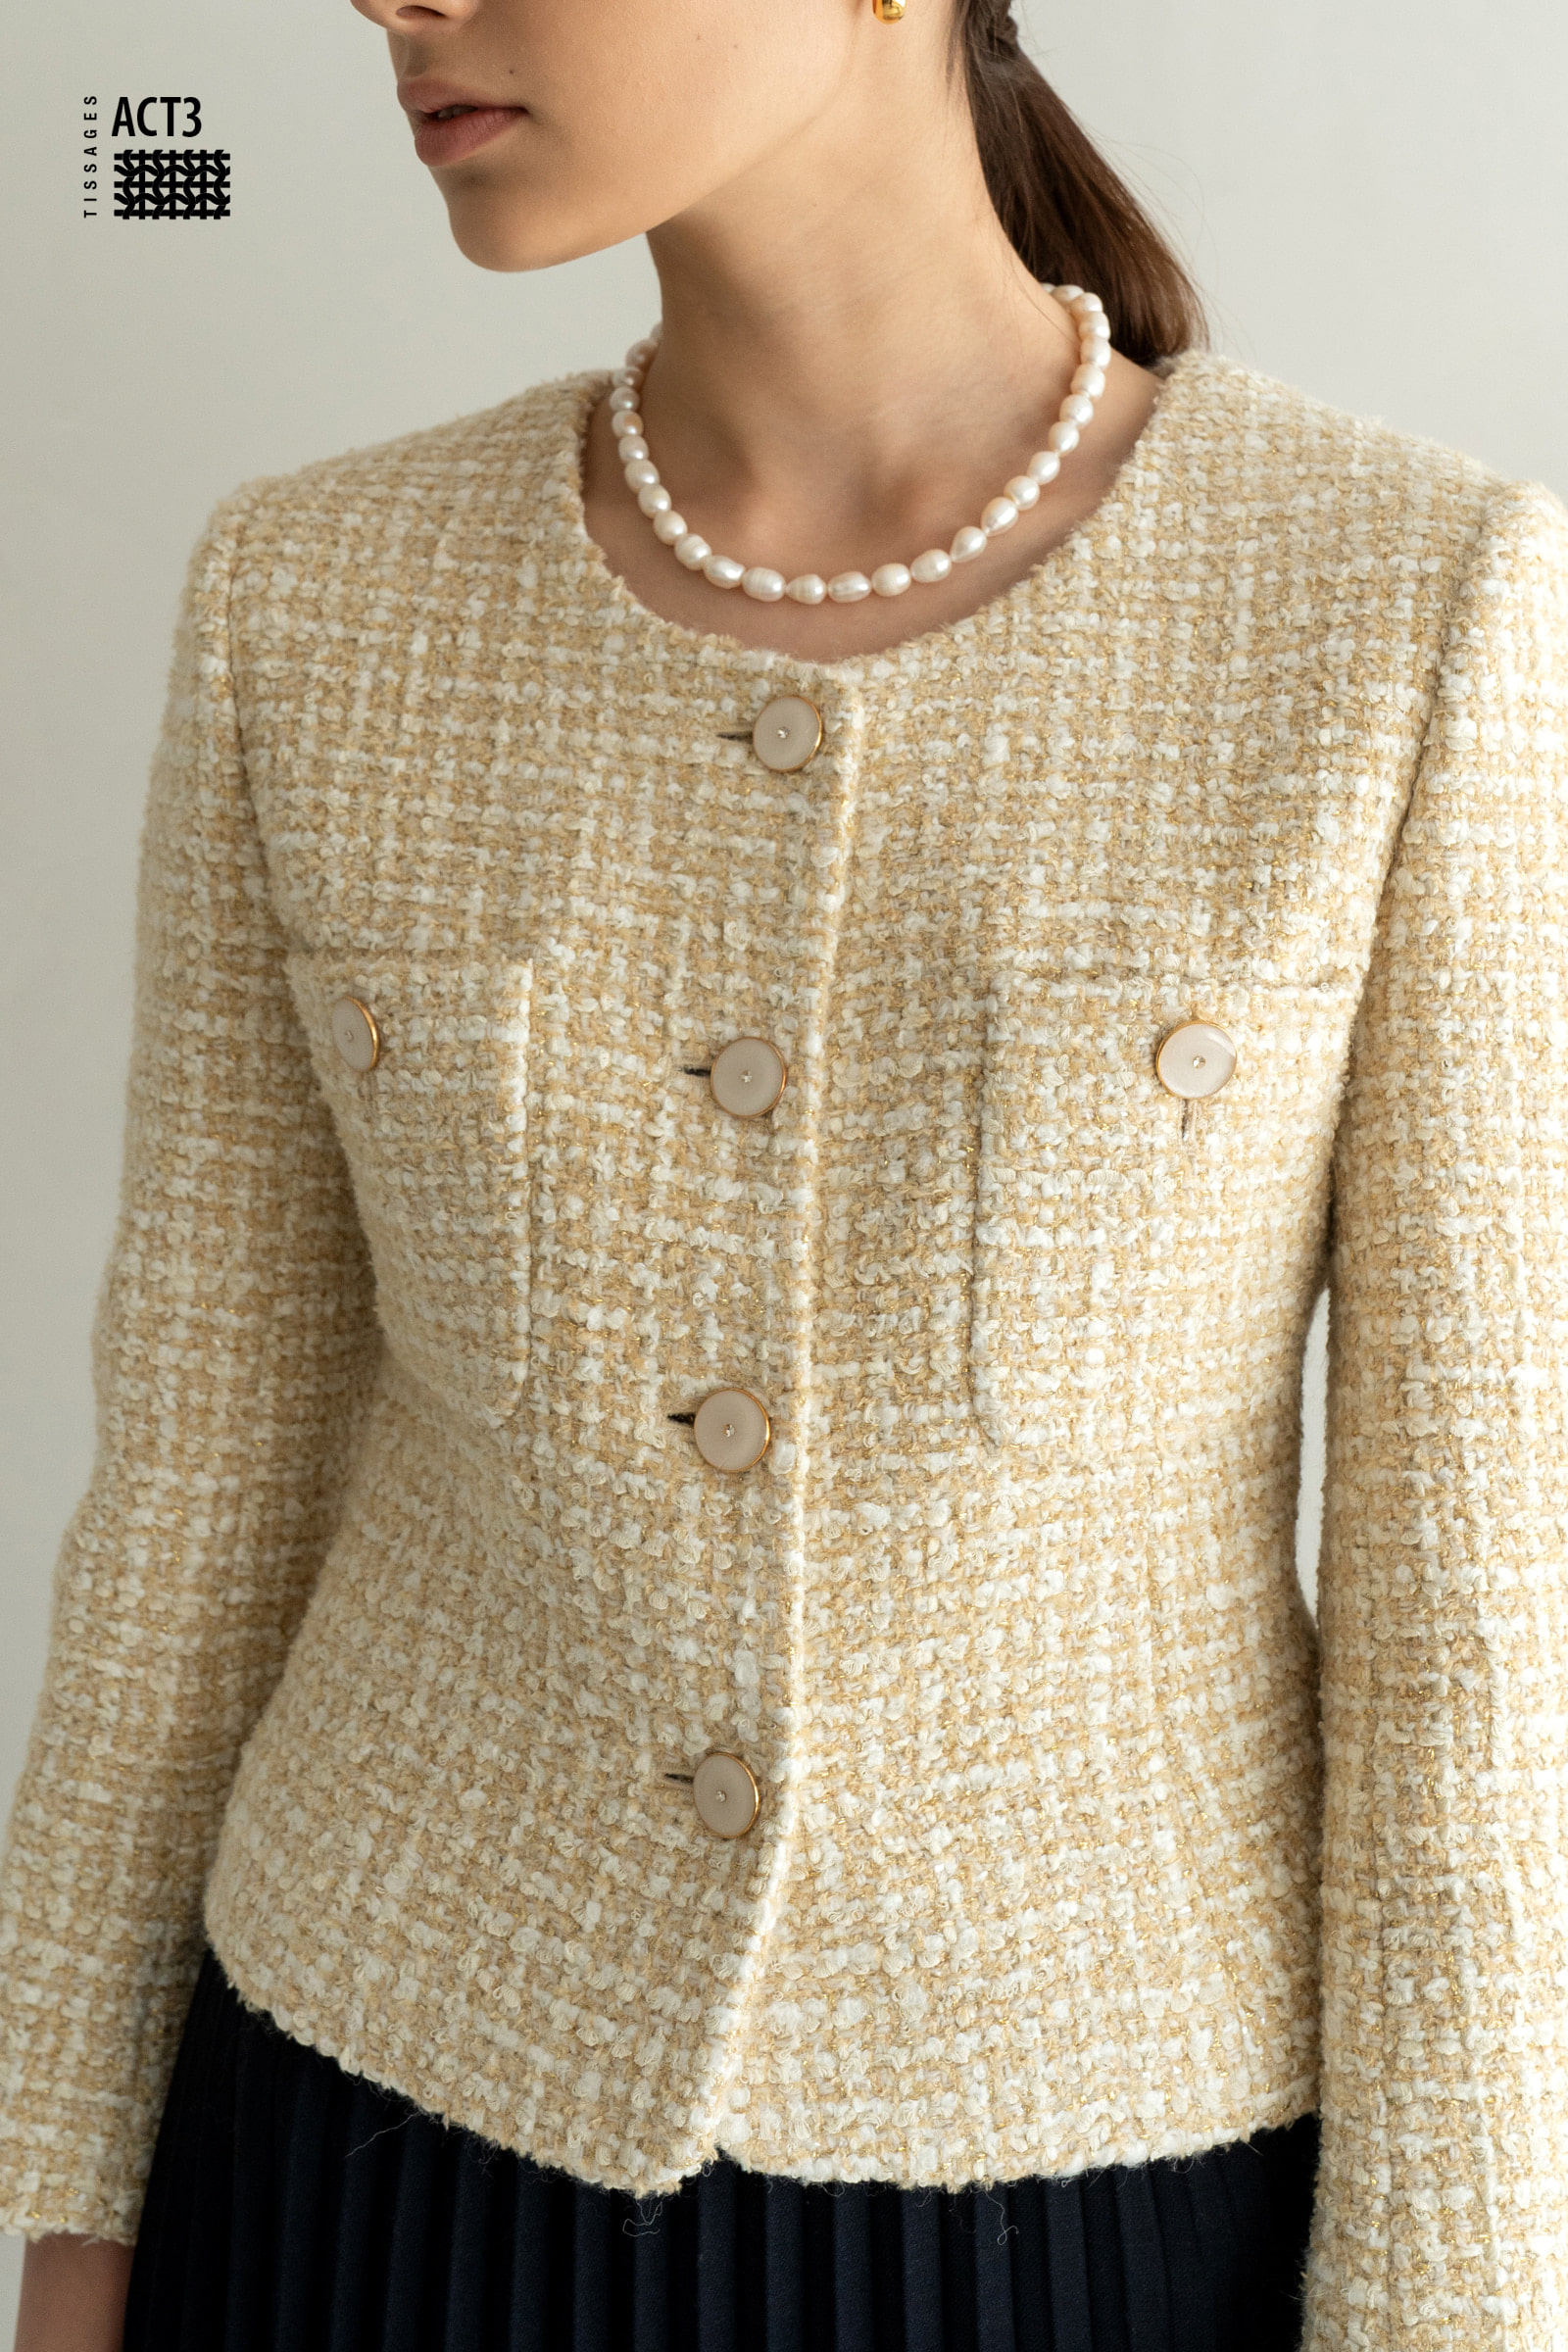 ACT3 TWEED JACKET yellow beige VER.1 [Fabric by ACT3]